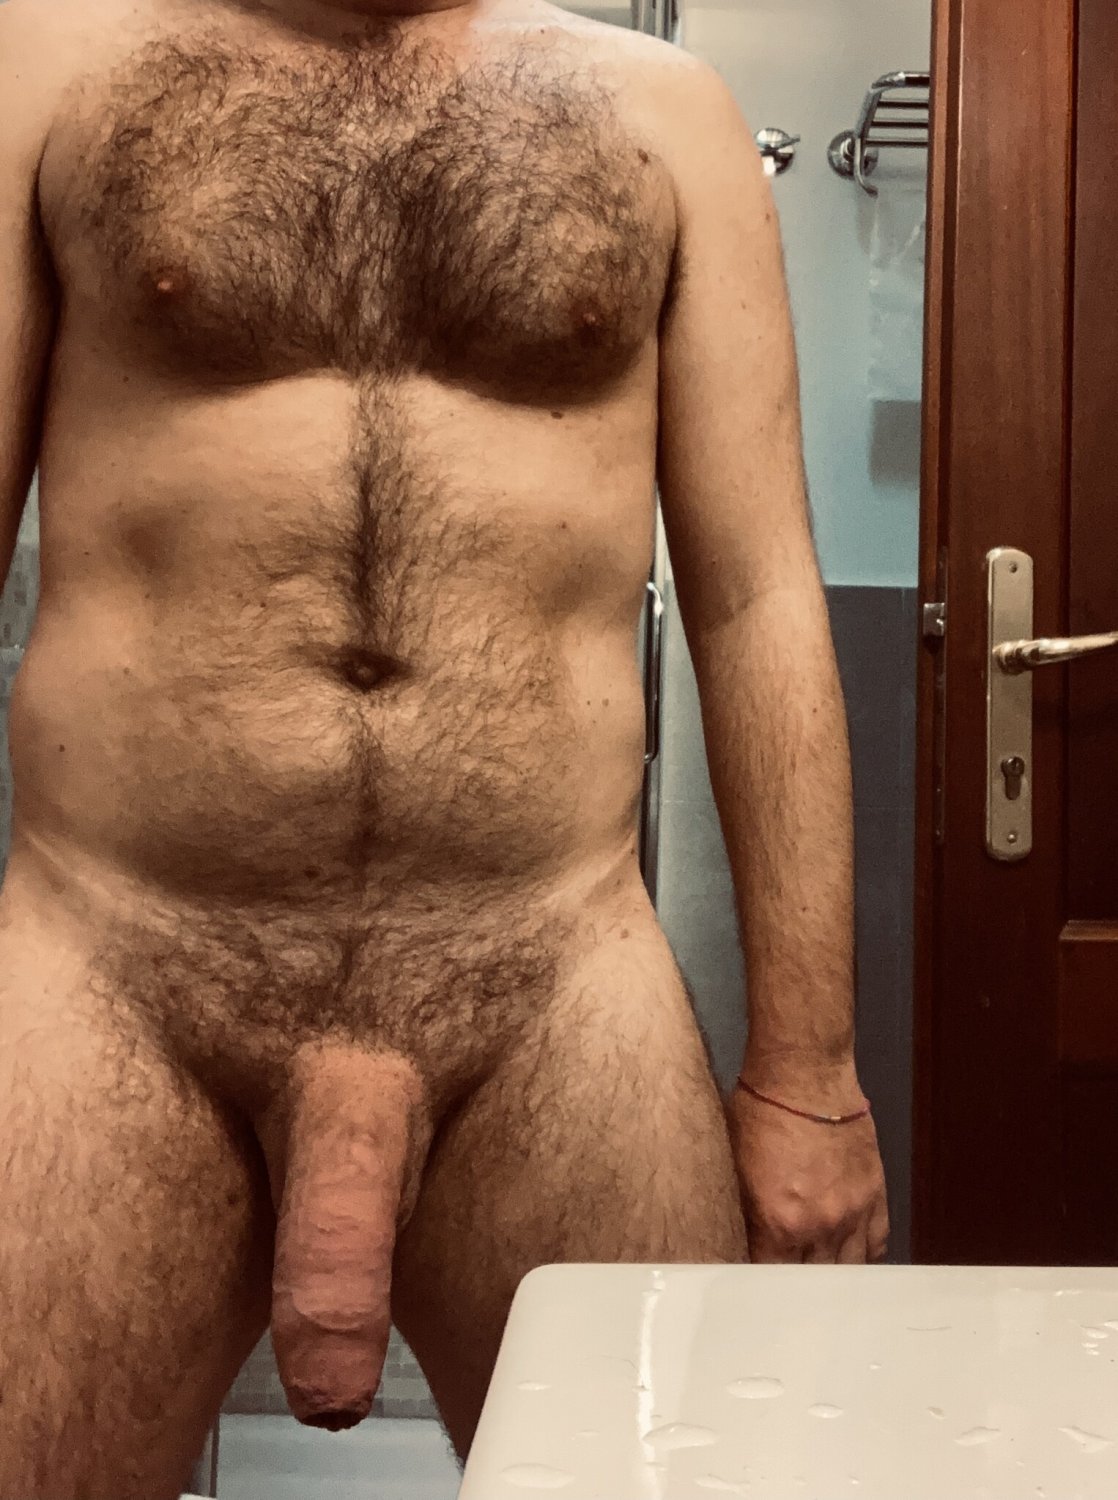 Large Fat Cocks - Who like a big fat cock - Porn Videos & Photos - EroMe